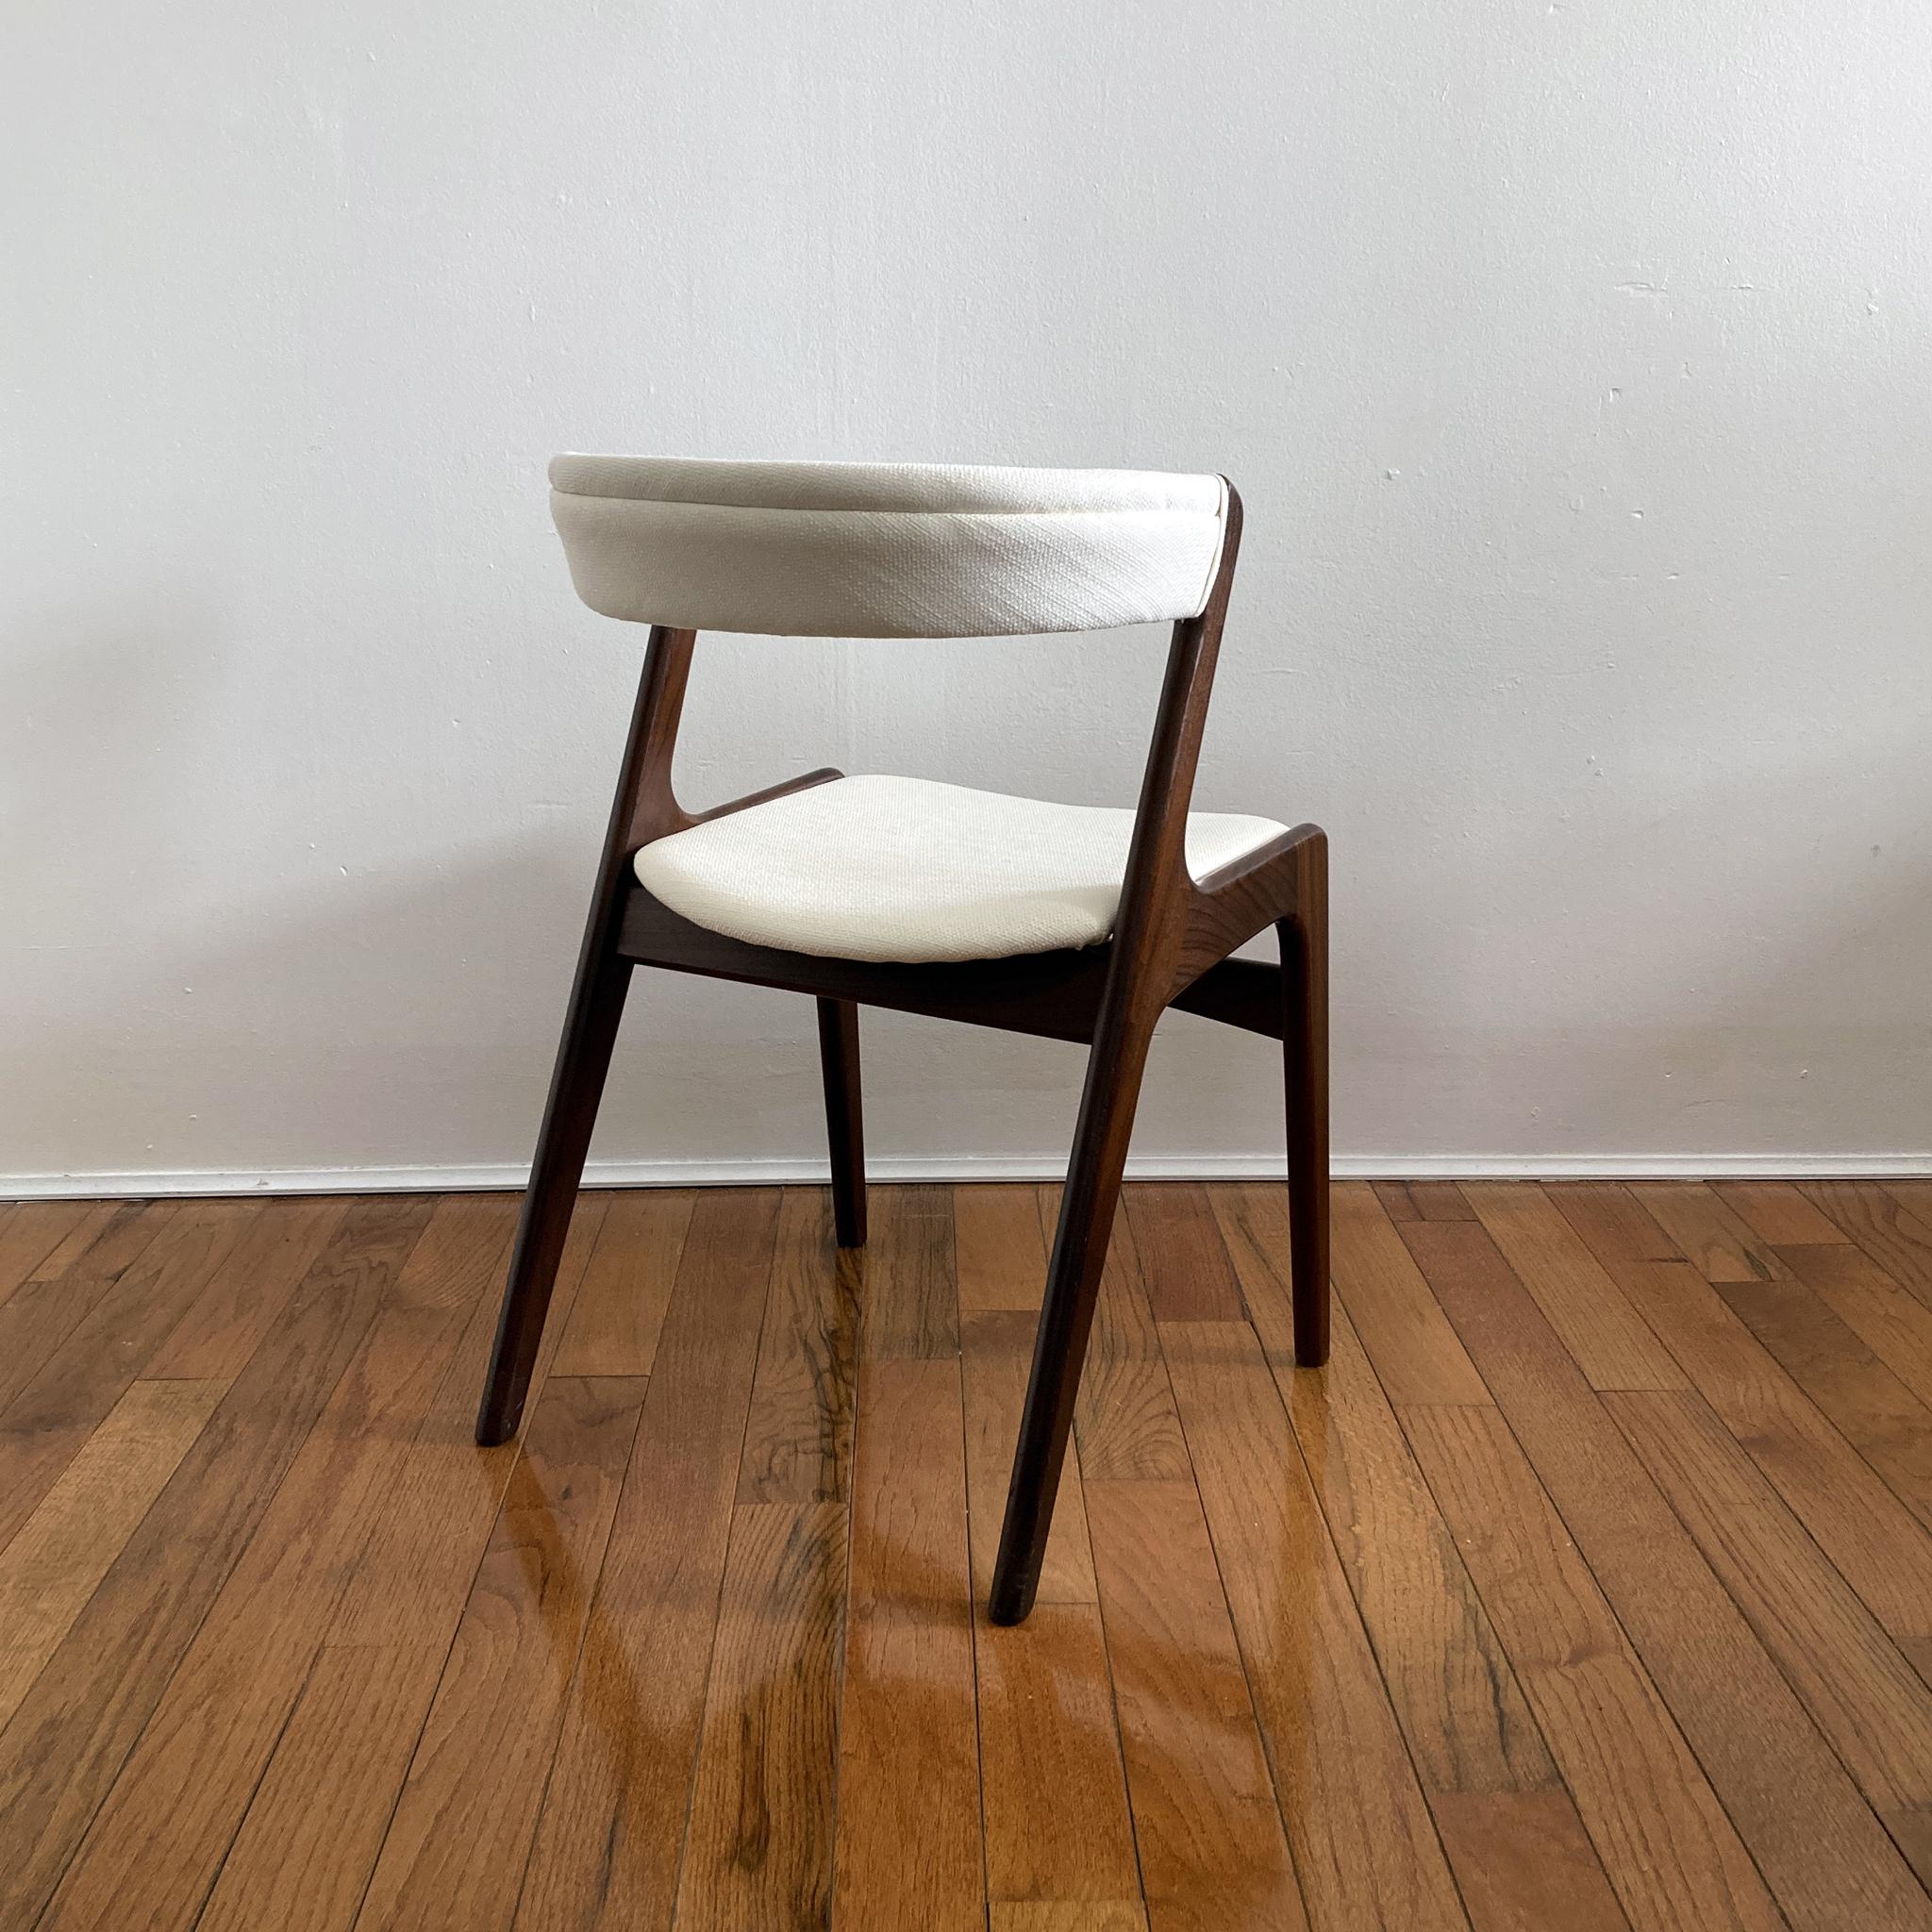 Kai Kristiansen Ivory Tweed Curved Back Teak Chair, Danish, 1960s In Good Condition For Sale In New York, NY